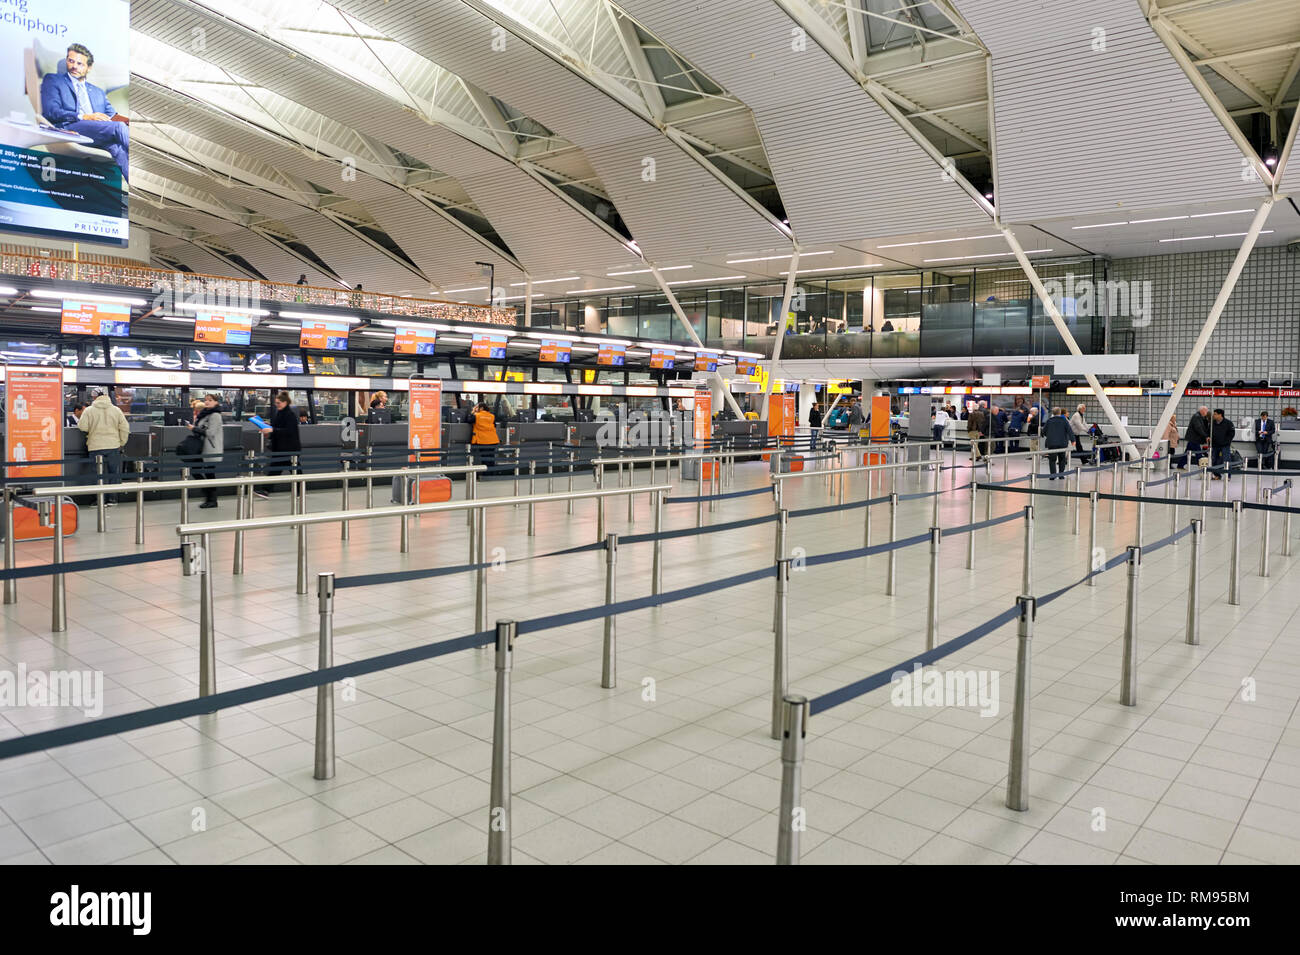 AMSTERDAM, NETHERLANDS - CIRCA NOVEMBER, 2015: check-in counters at Schiphol Airport. Amsterdam Airport Schiphol is the main international airport of  Stock Photo